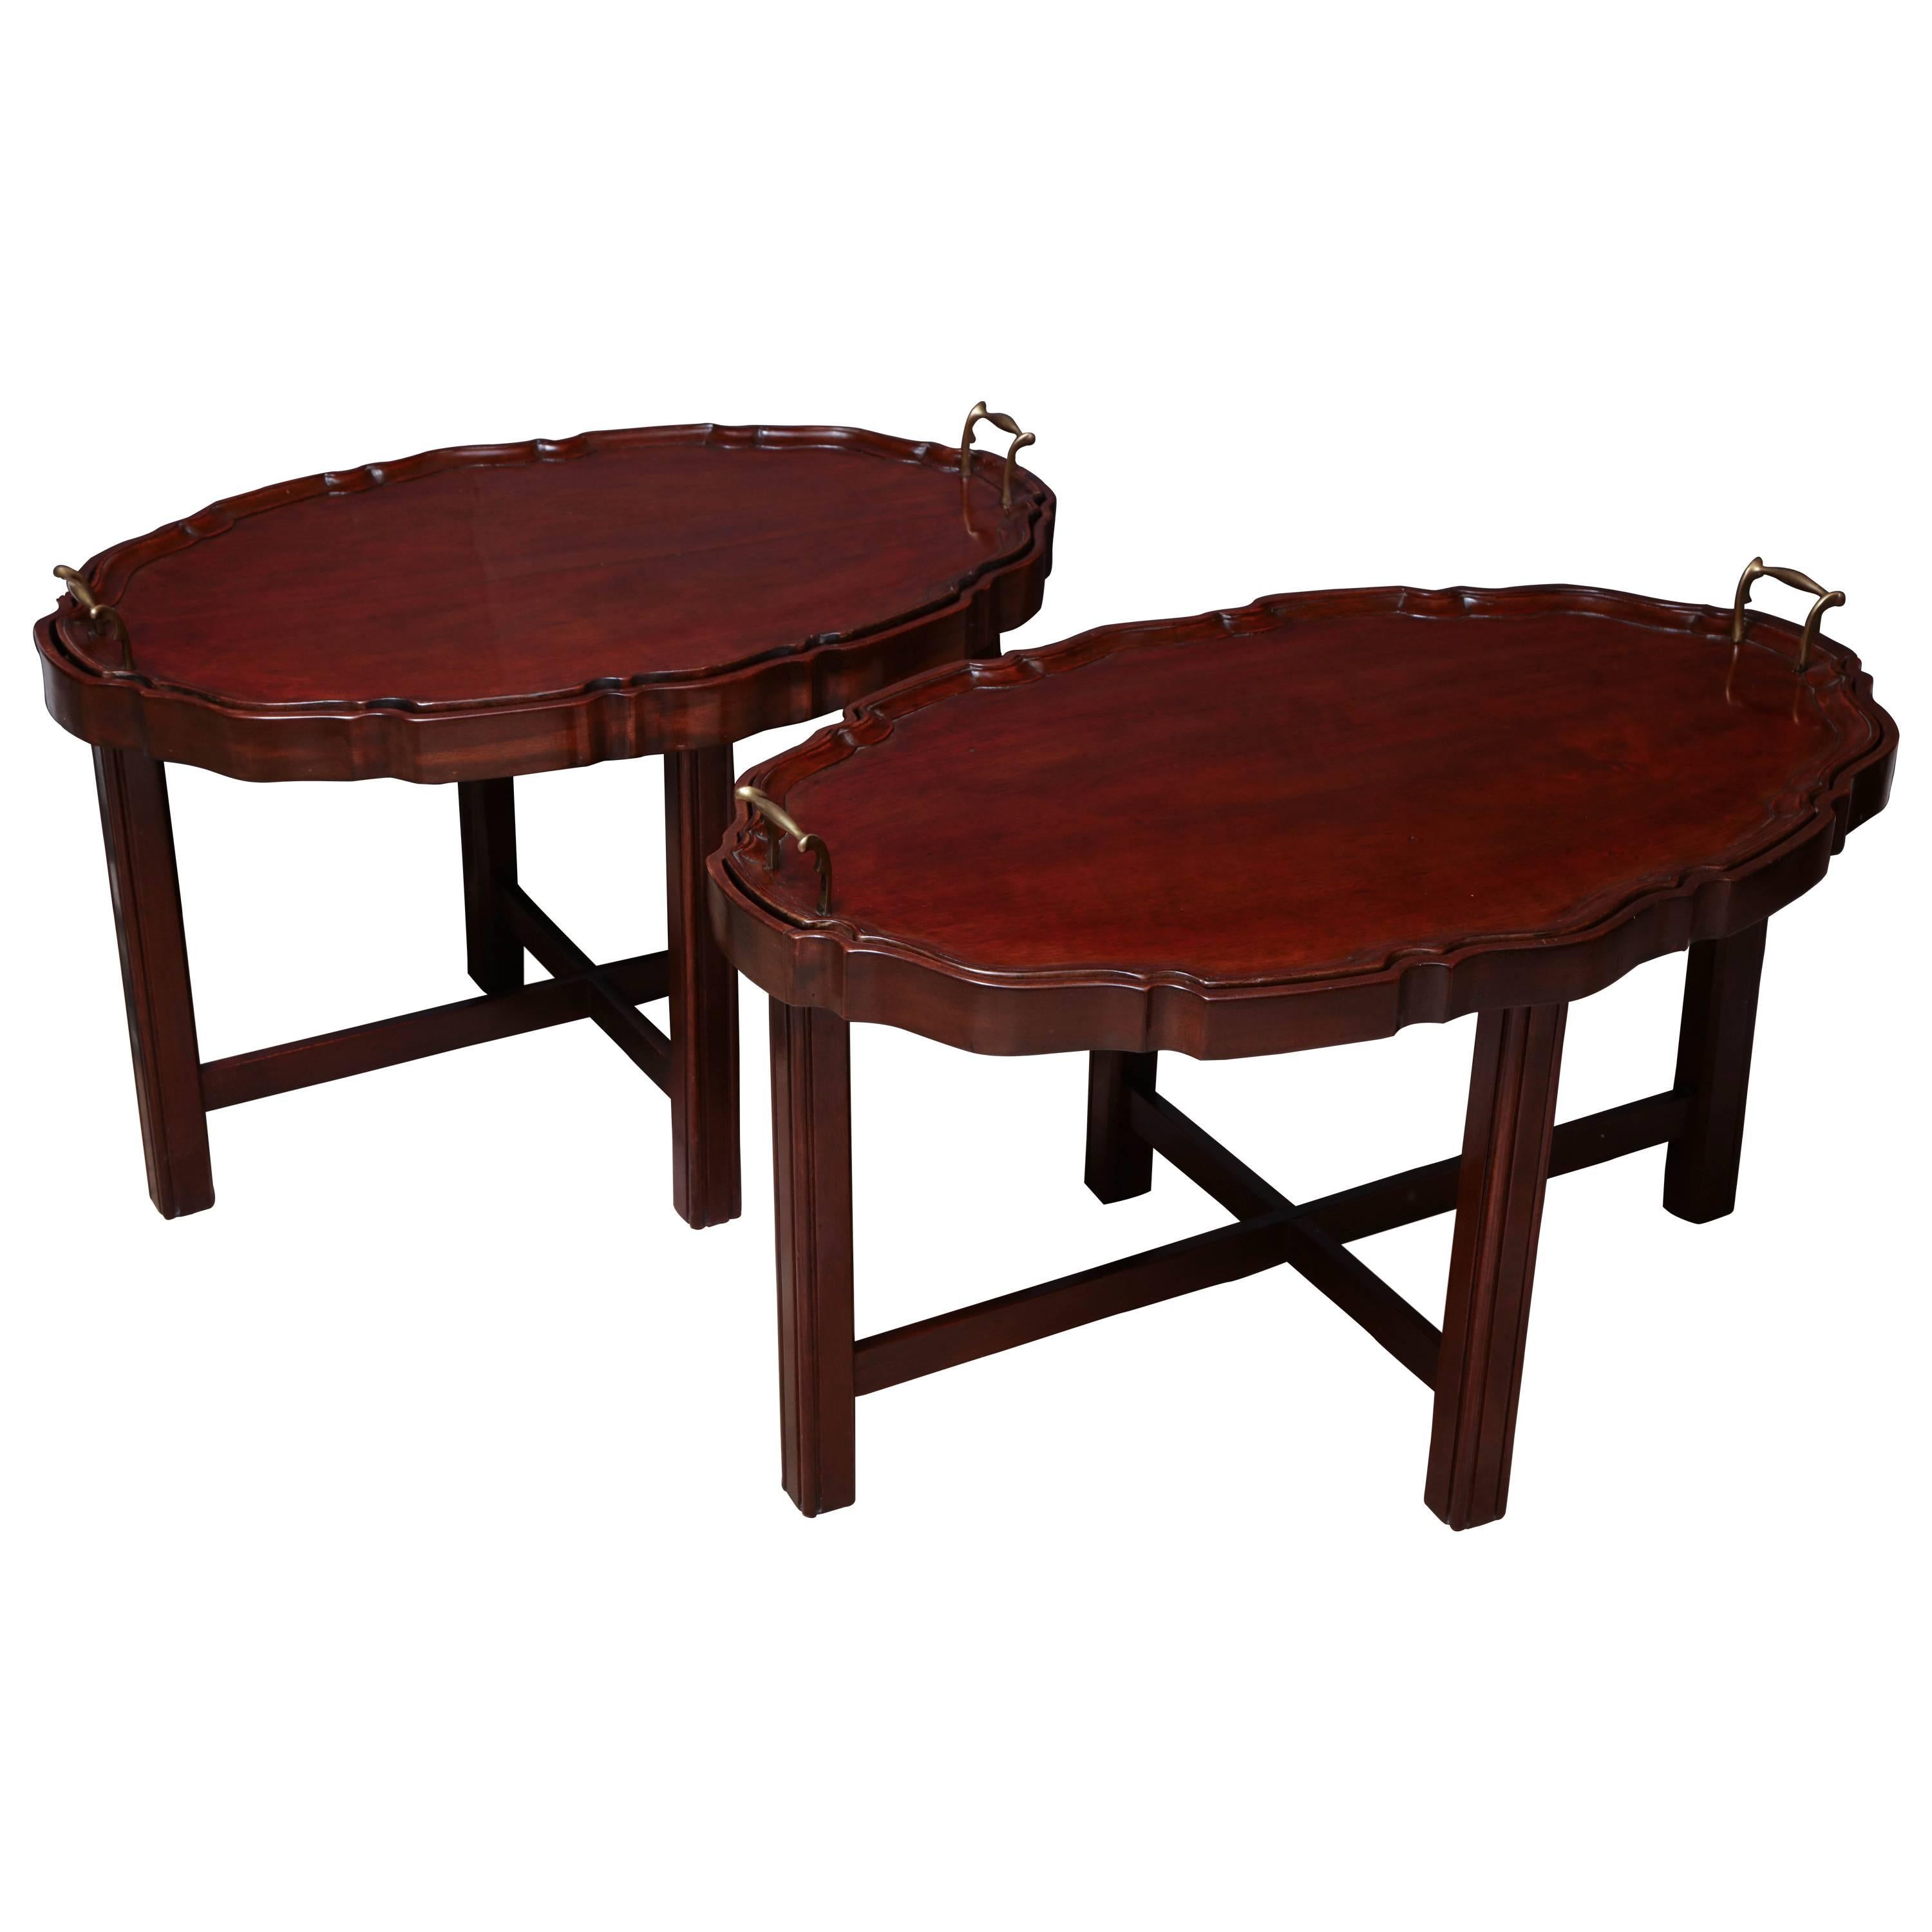 Two English Mahogany Trays on Stands